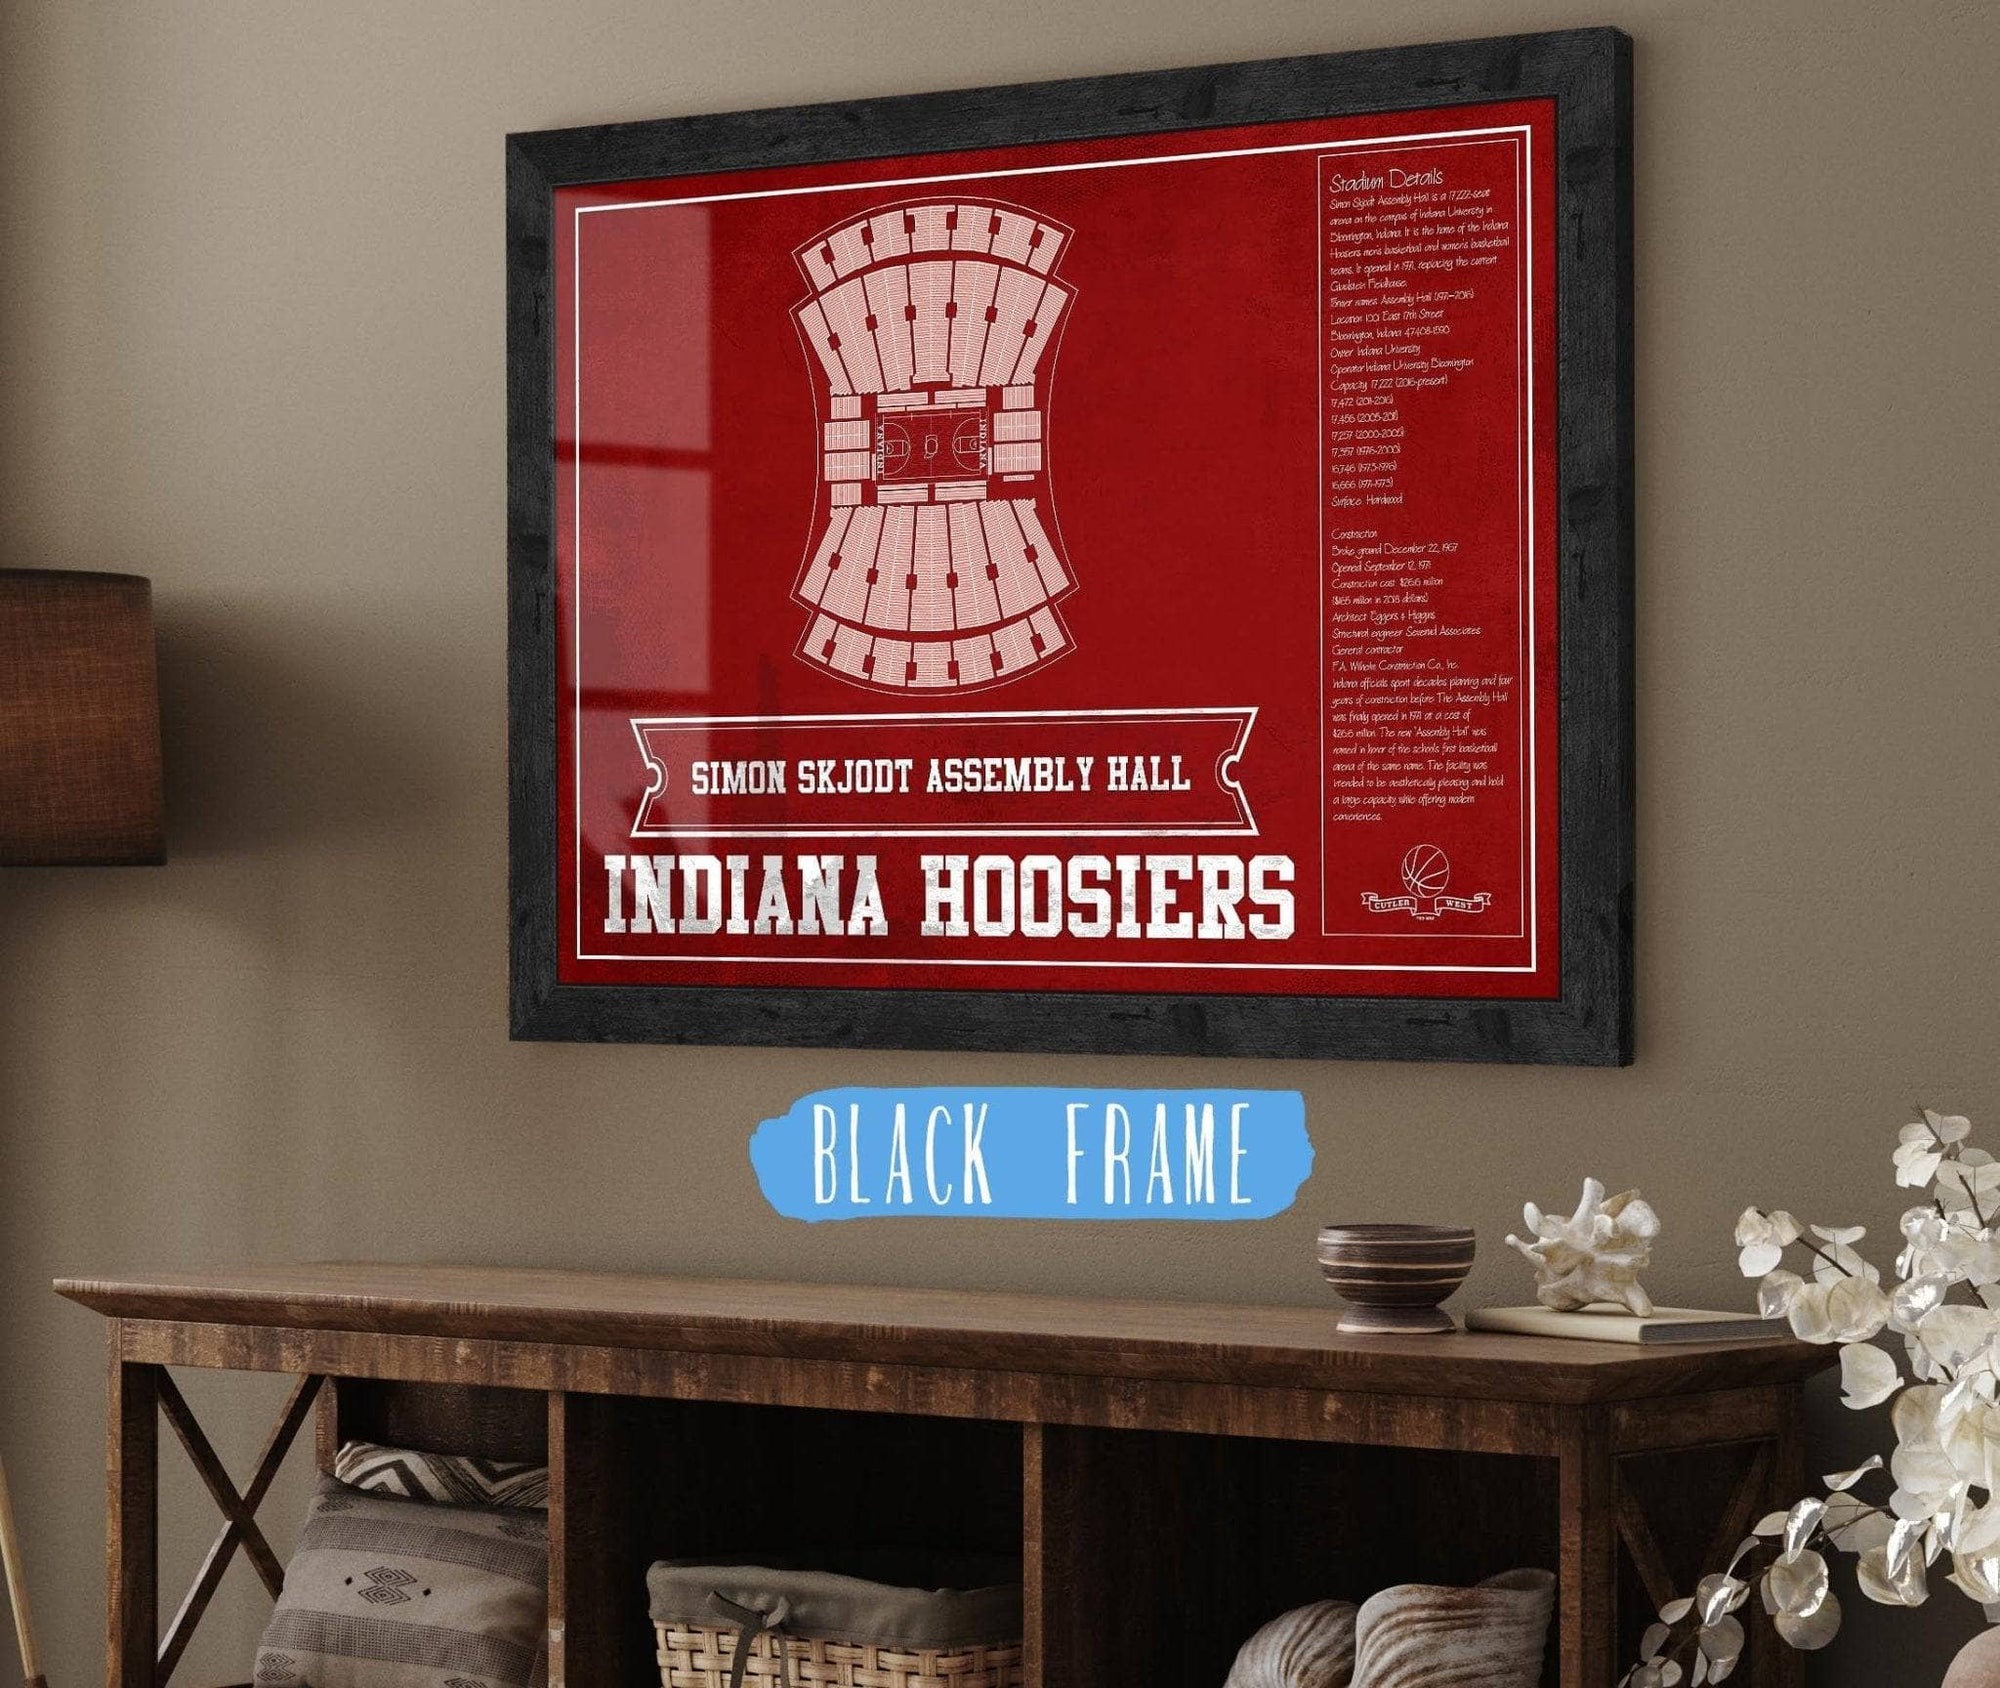 Cutler West Basketball Collection 14" x 11" / Black Frame Simon Skjodt Assembly Hall Indiana Hoosiers Team Color NCAA Vintage Print 933350232_83361